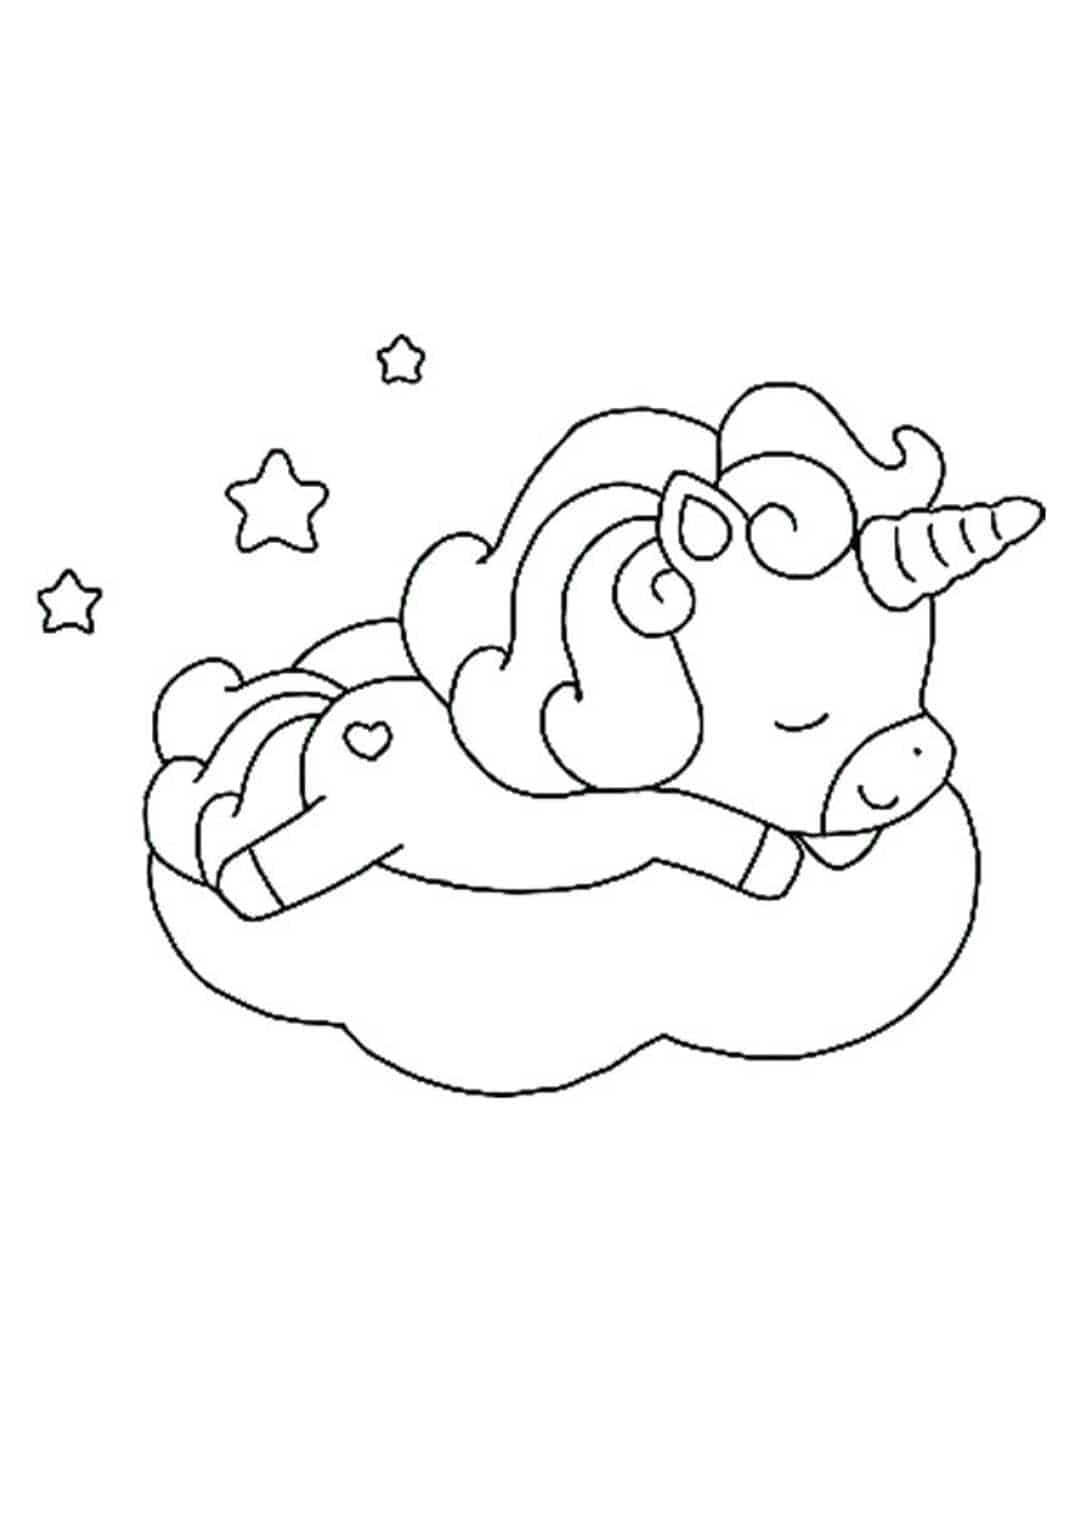 Cute baby unicorn dreaming coloring page